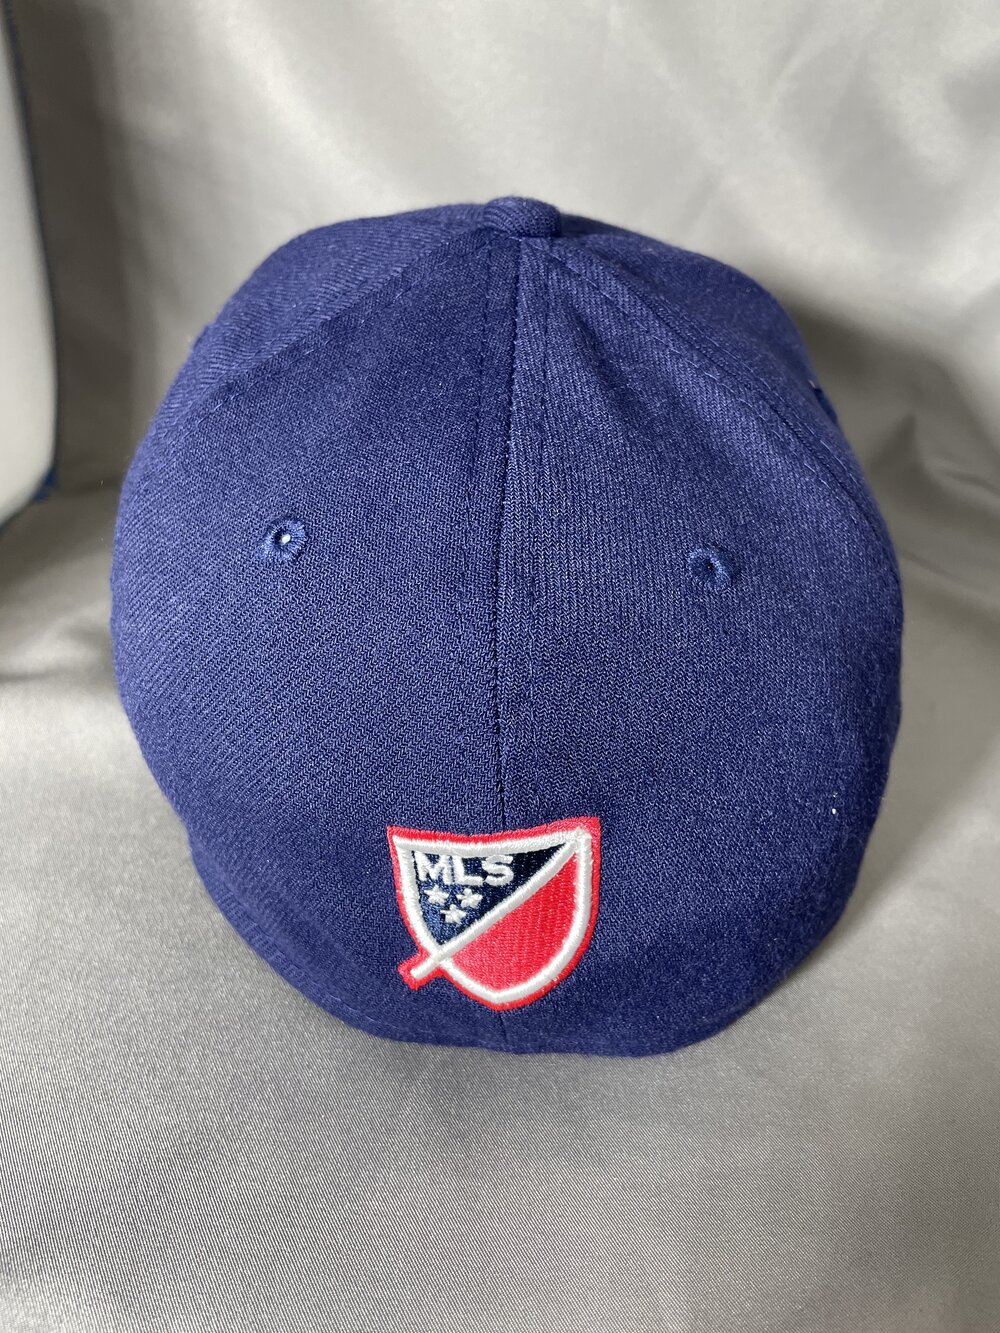 St. Louis BLUES Chile Youth Hat Baseball Ball Cap Flex FITTED #17